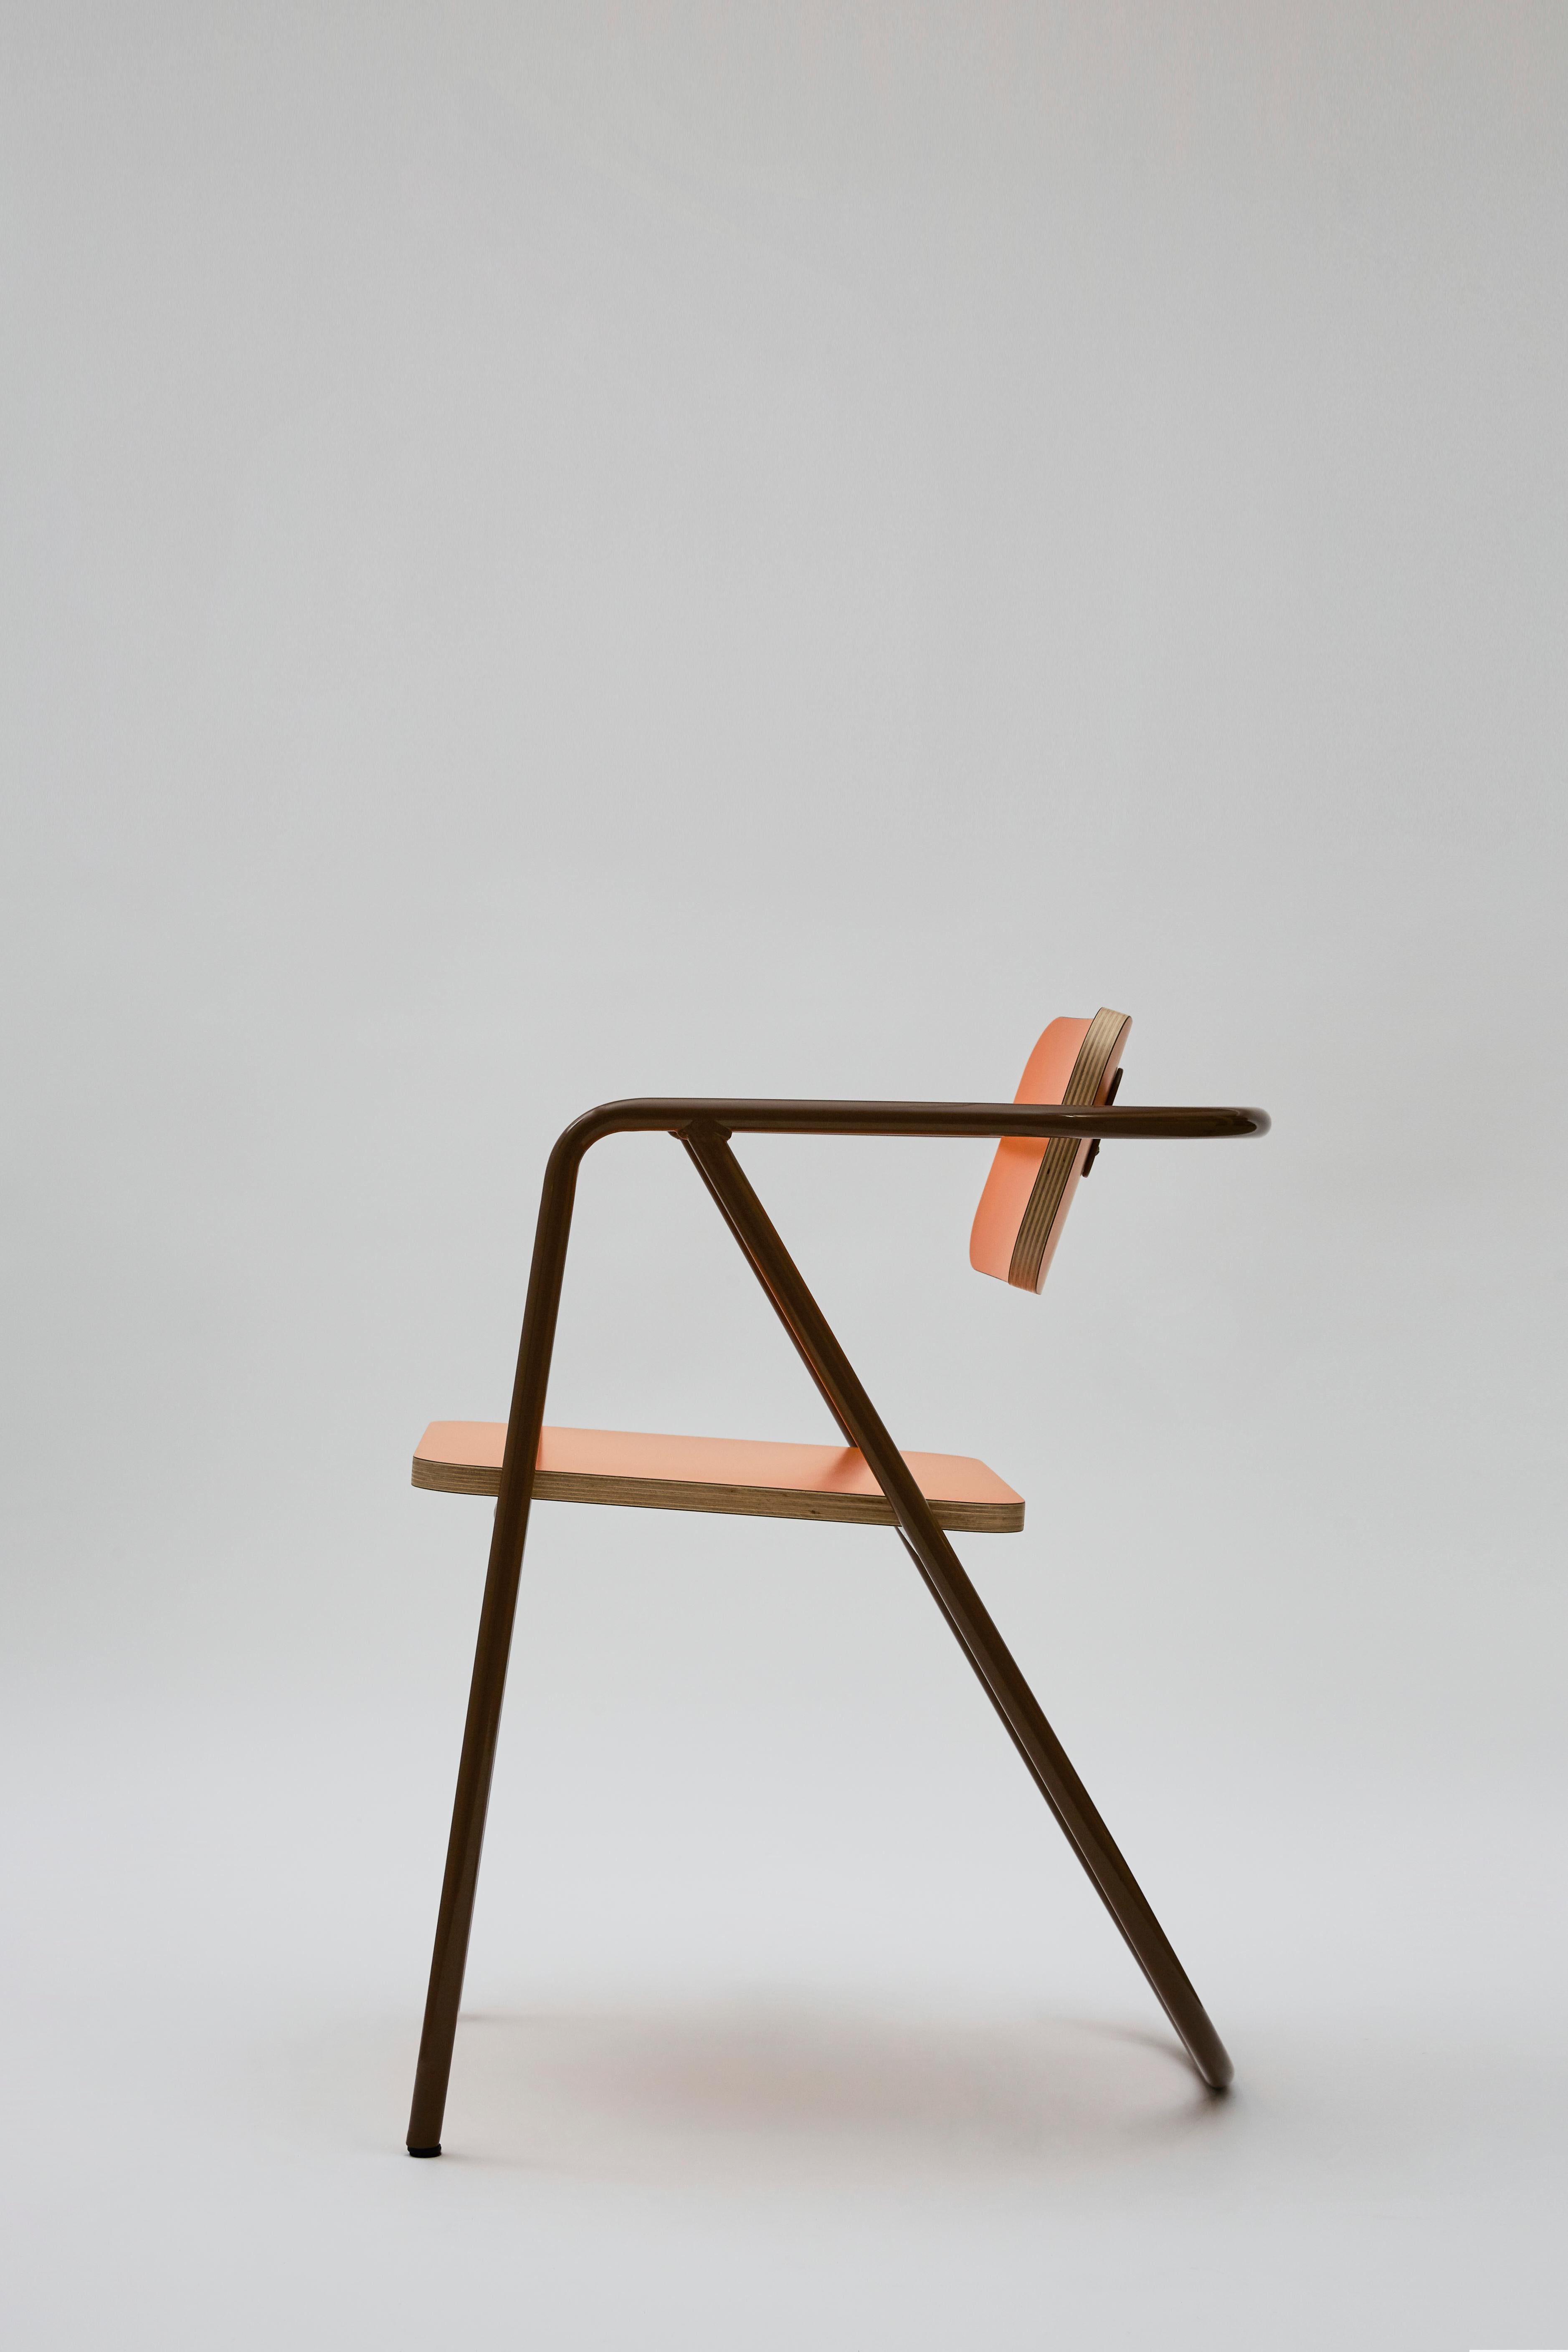 Other La Misciù Chair, Brown and Orange For Sale